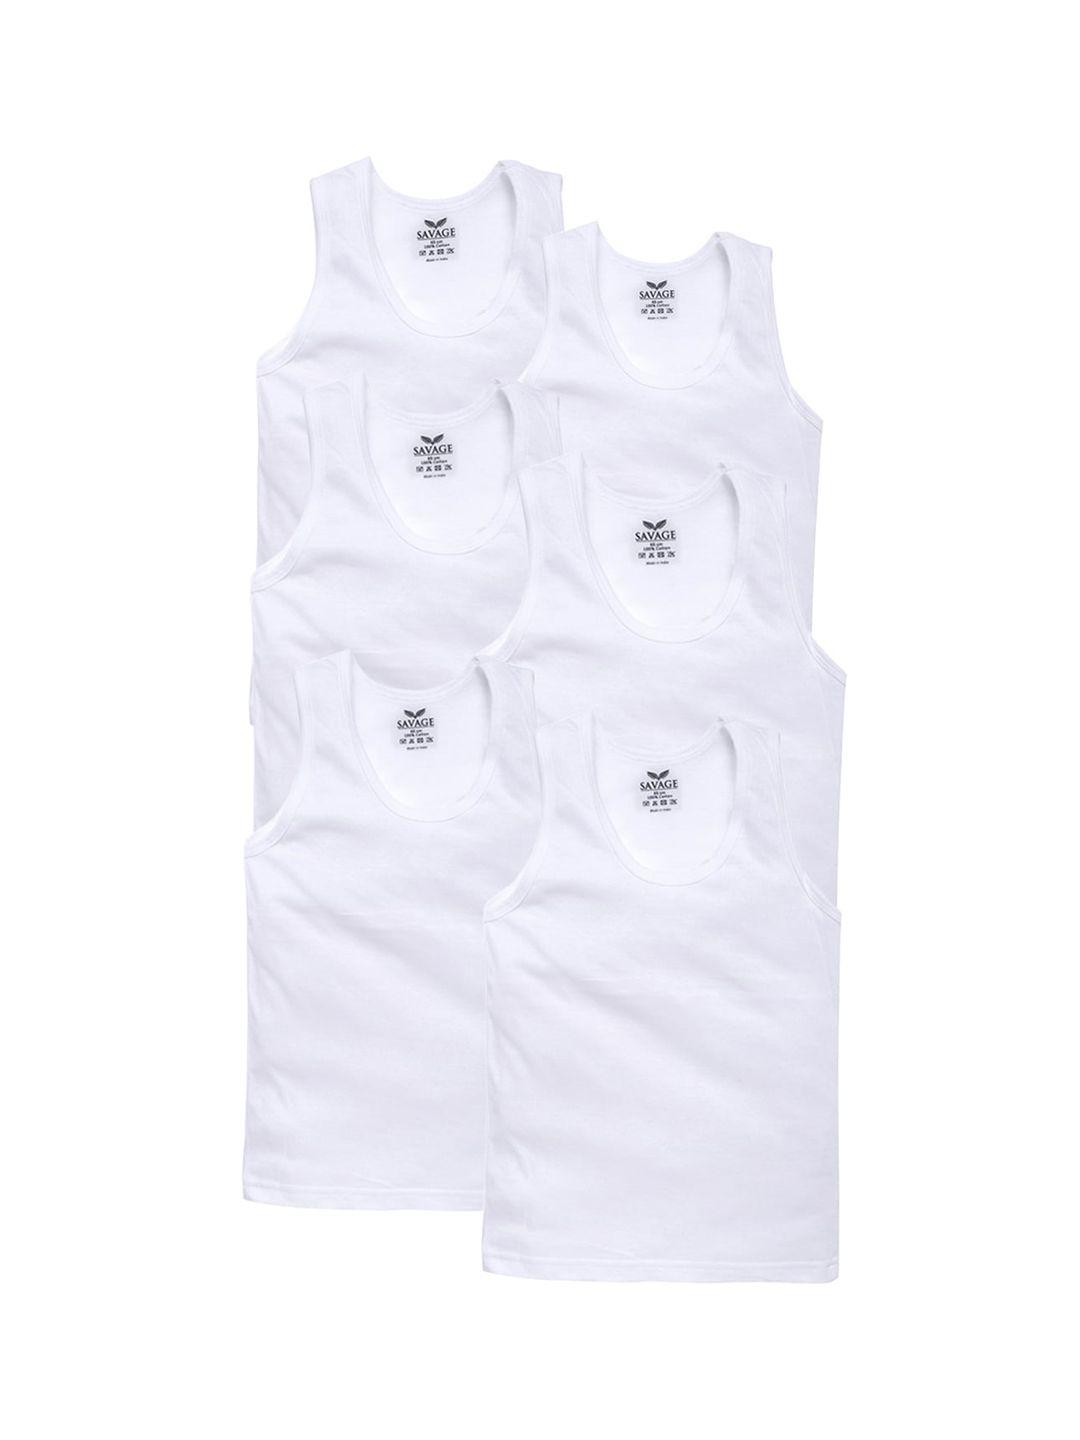 savage boys pack of 6 white solid cotton innerwear vests